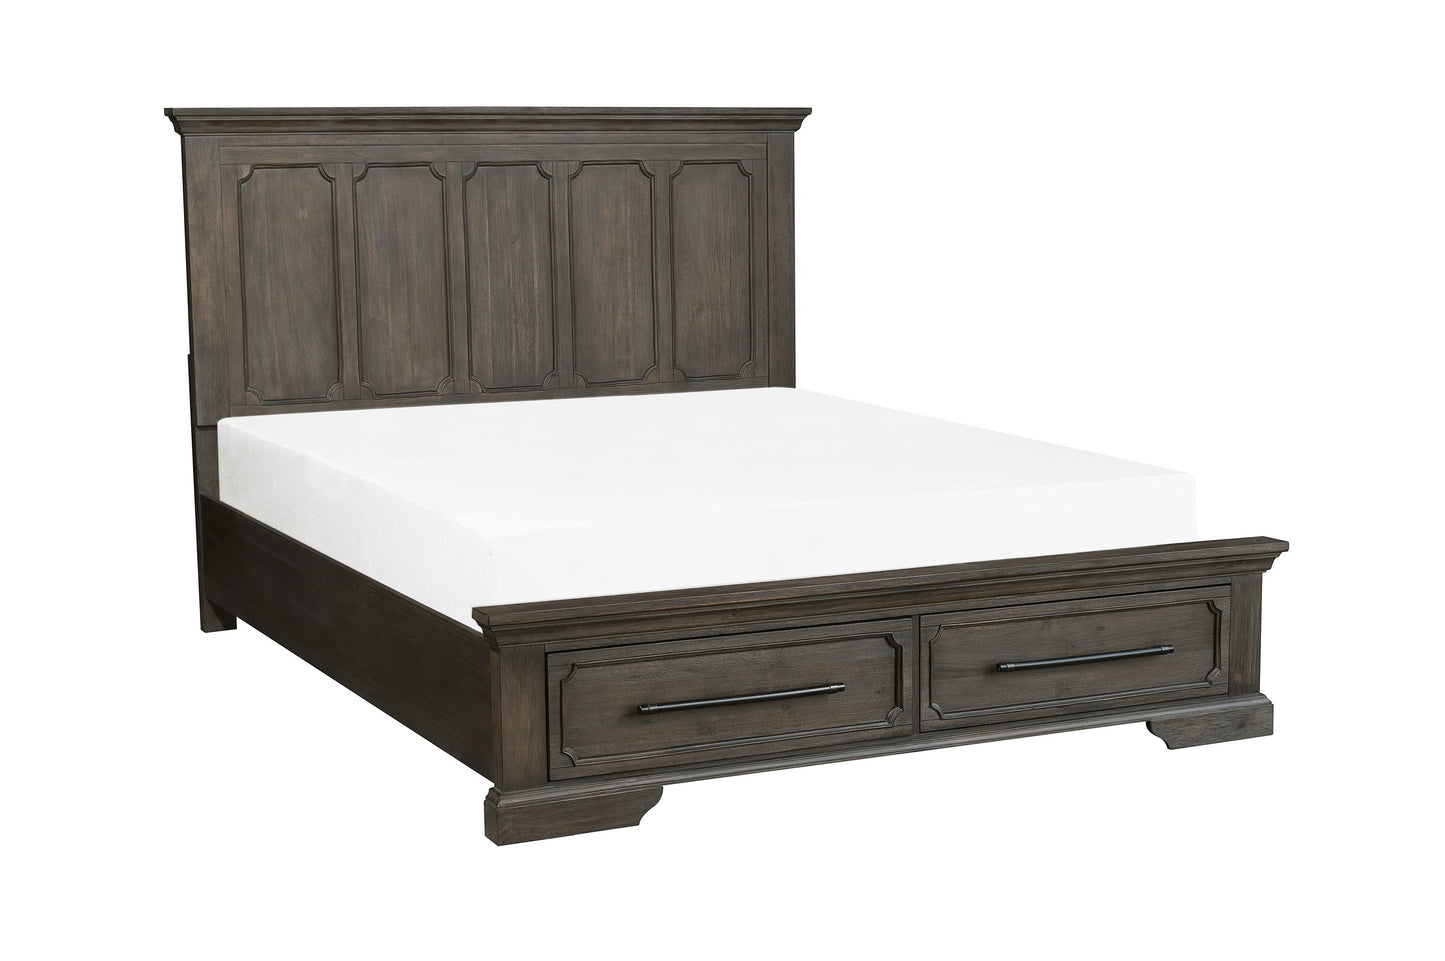 Homelegance Toulon 5PC Bedroom Set Cal King Platform Bed with Footboard Storages Dresser Mirror Two Nightstand in Distressed Oak